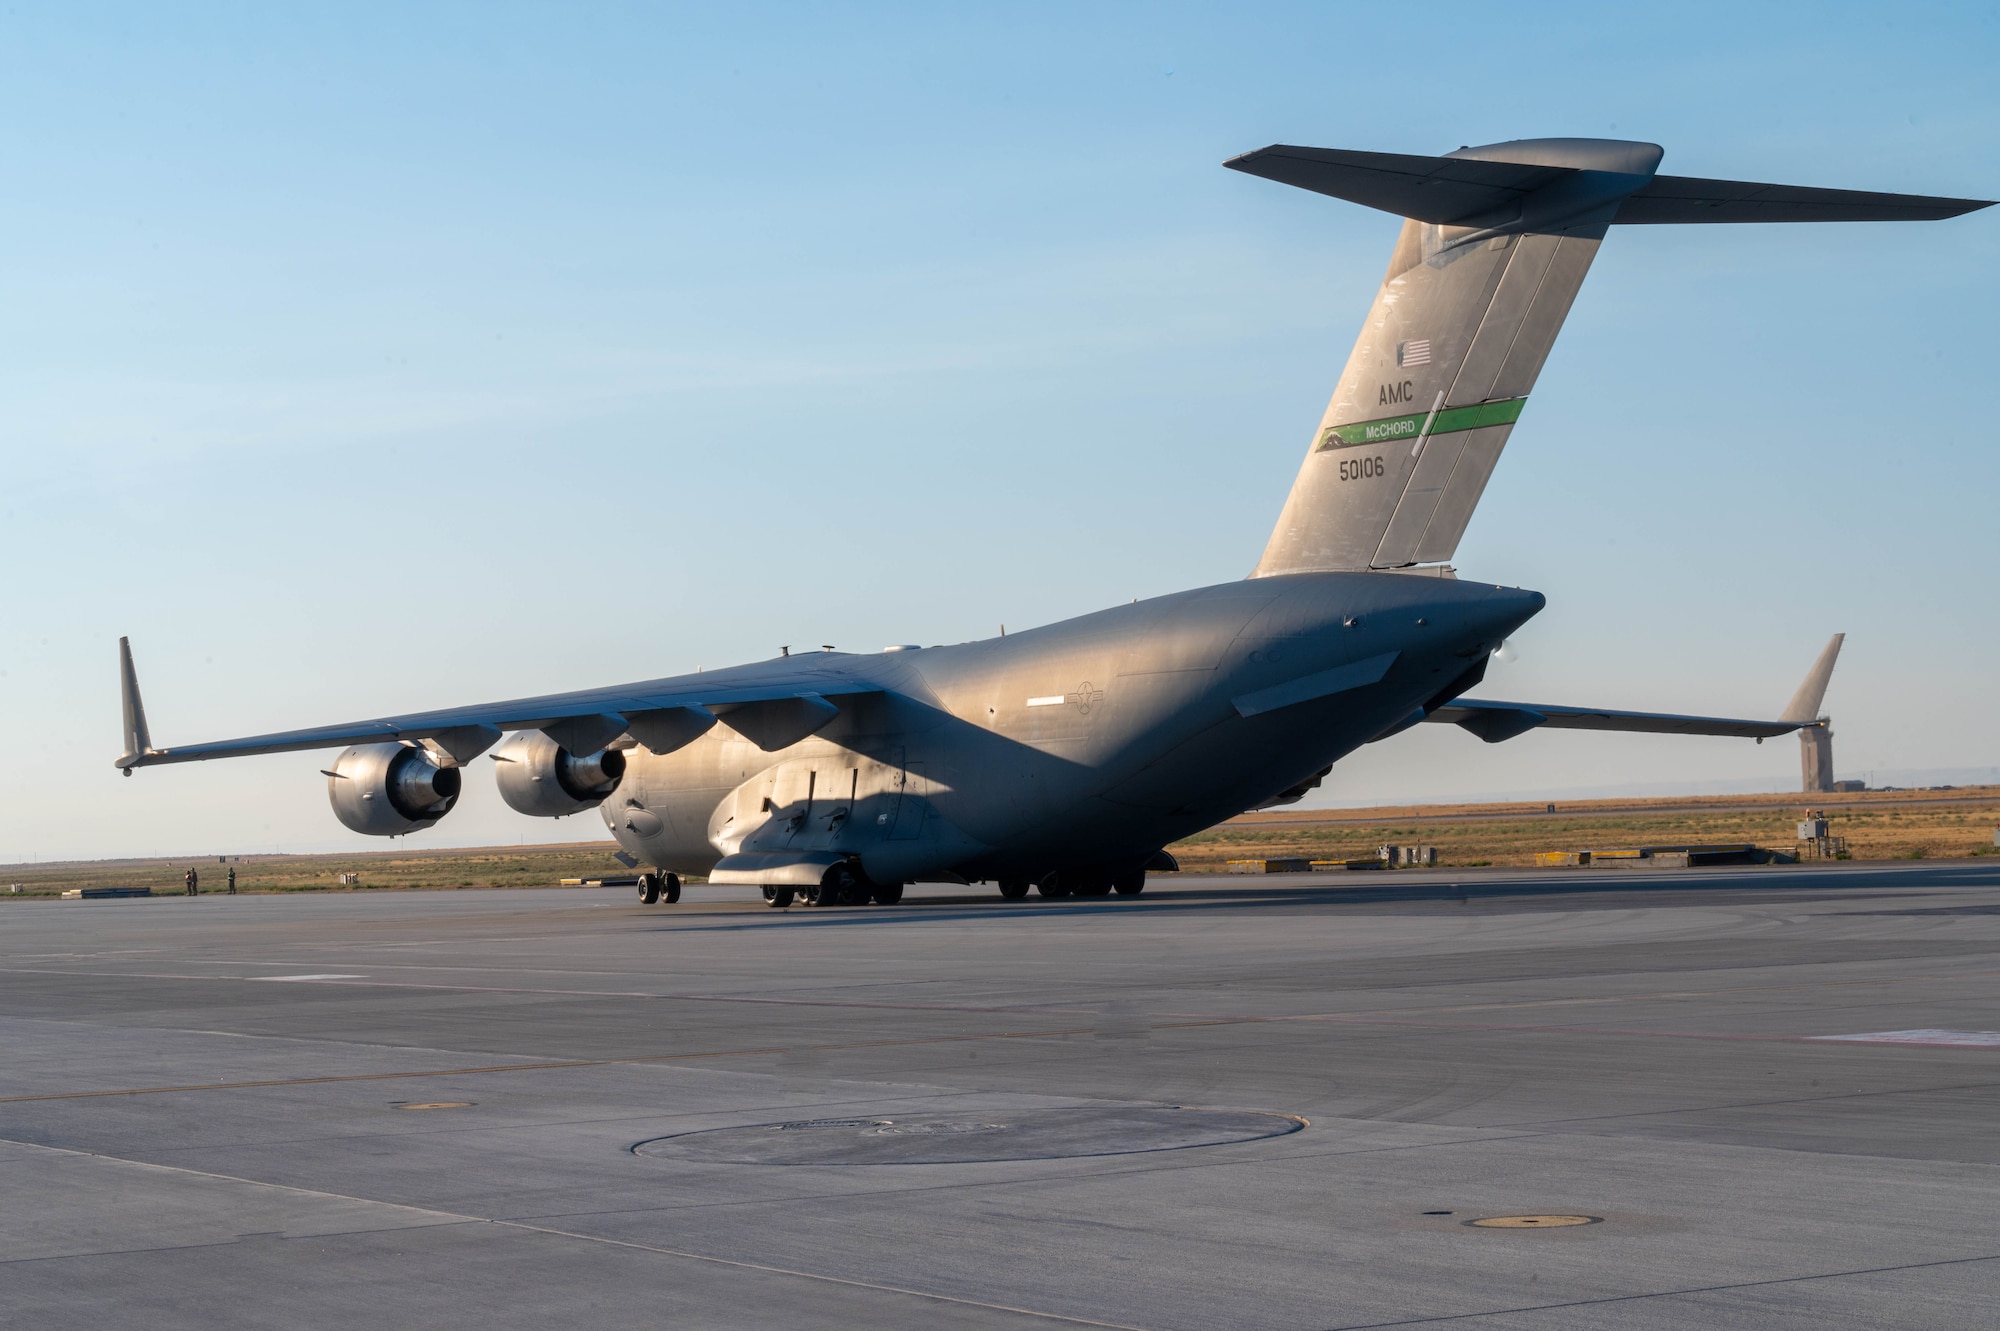 McChord utilizes new refueling waivers to fuel fighters faster.